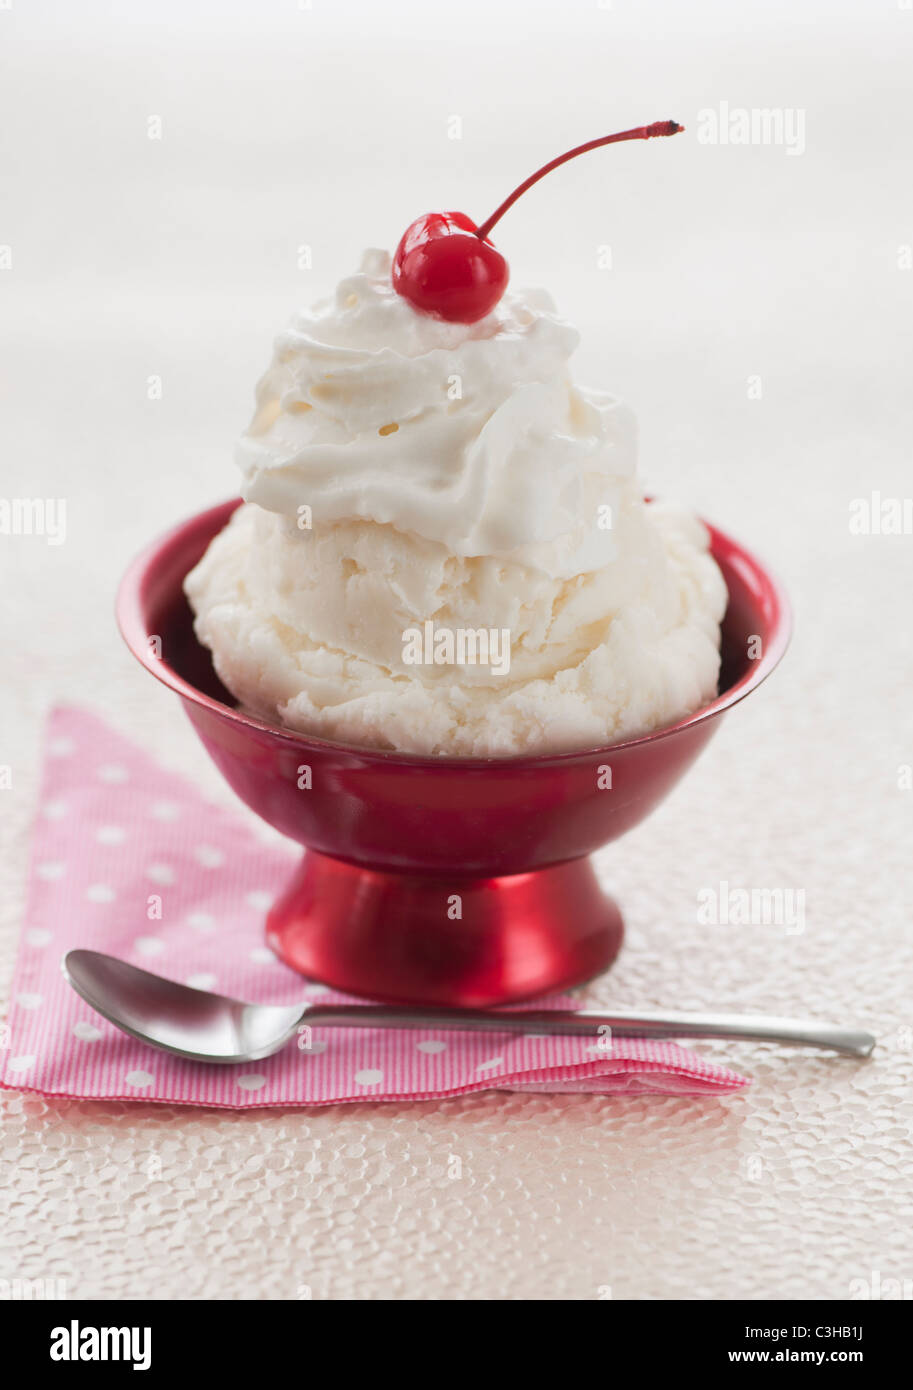 Close up of ice cream with cherry on top Stock Photo